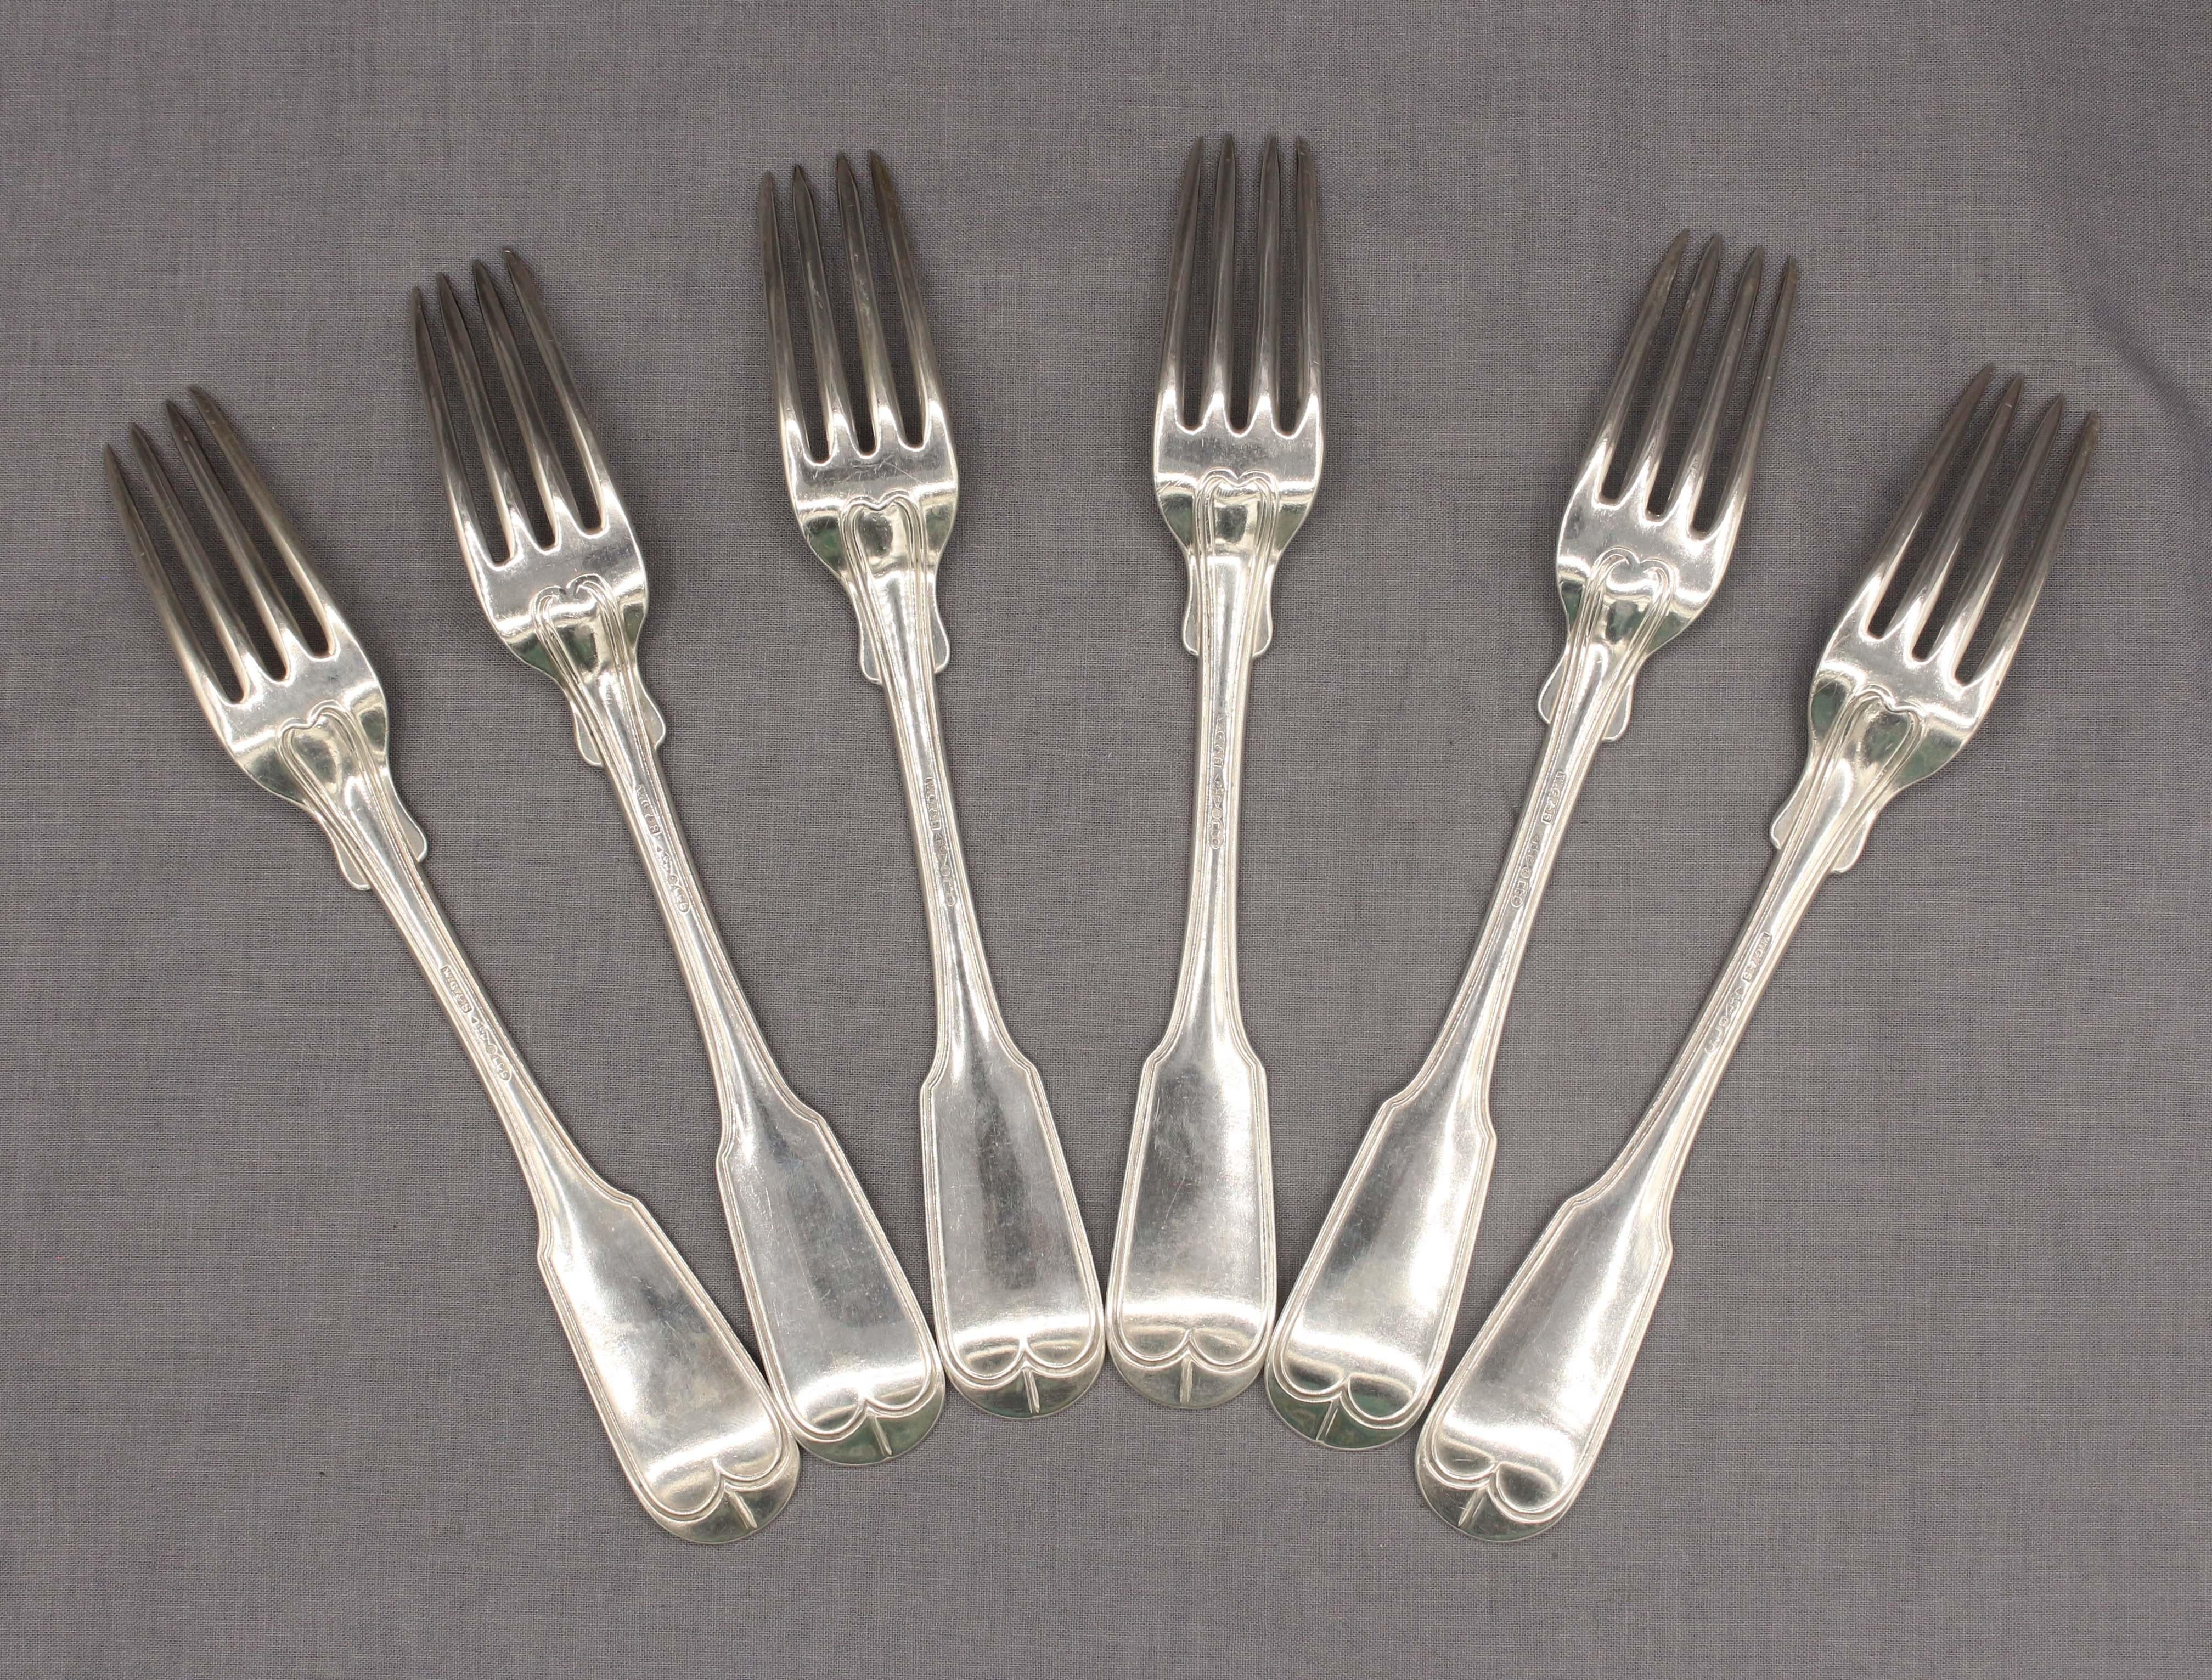 Dated 1850 set of 6 coin silver dinner forks, fiddle thread pattern, by William Gale & Son, NY, NY. In business to 1870 & likely the pattern date. Monogram: MAD. 10.80 troy oz.
7 1/2